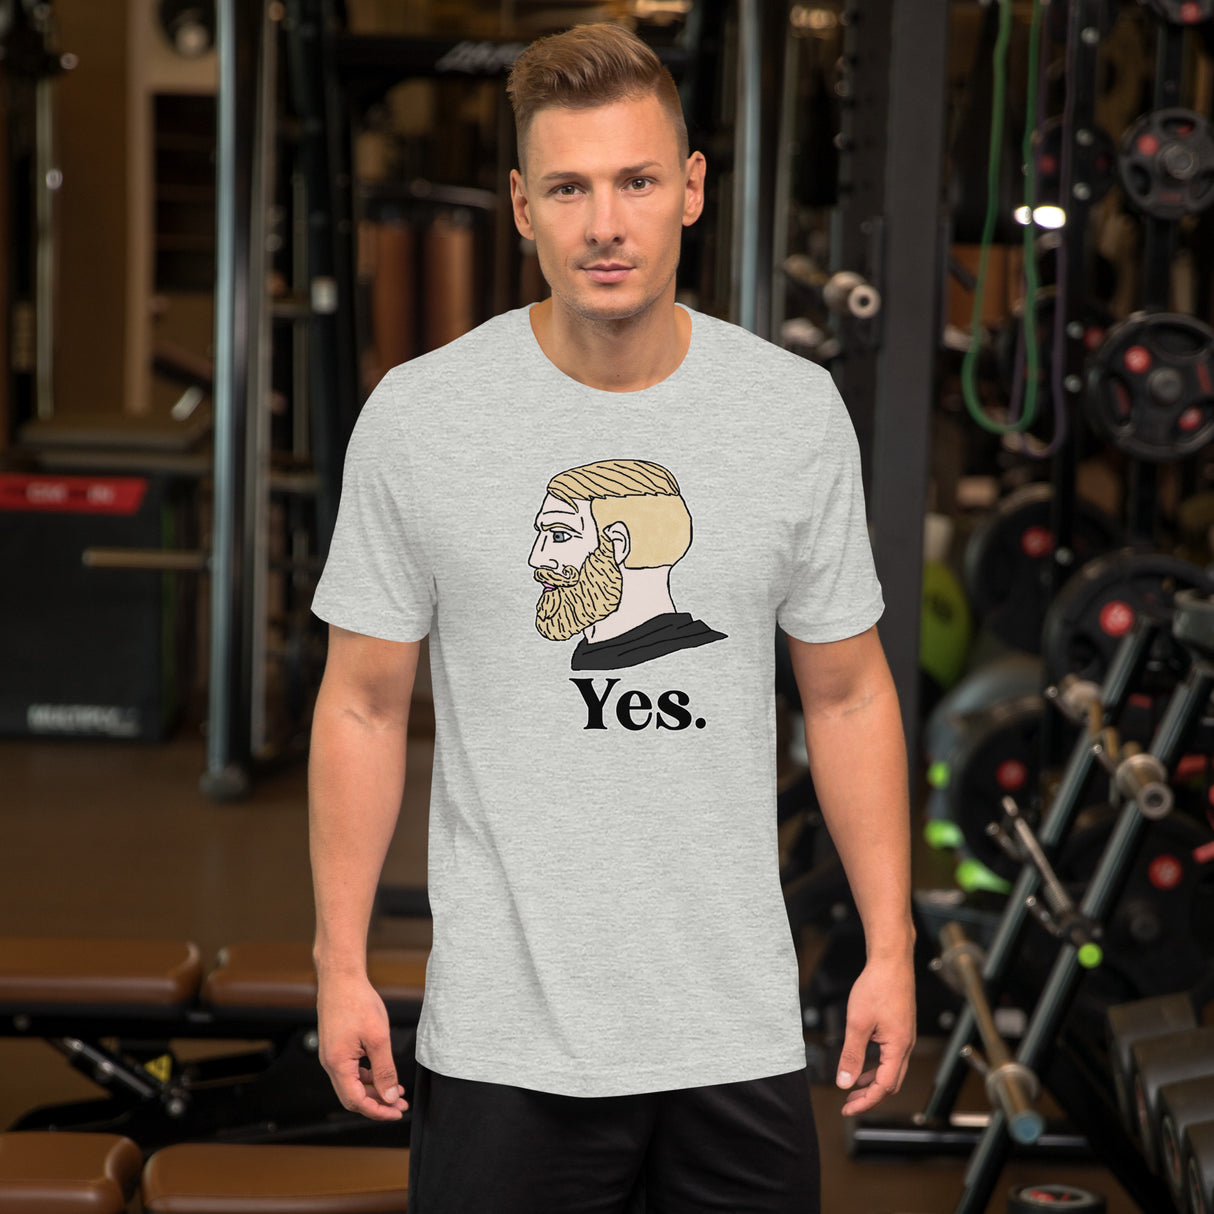  Yes Chad Meme T-Shirt : Clothing, Shoes & Jewelry